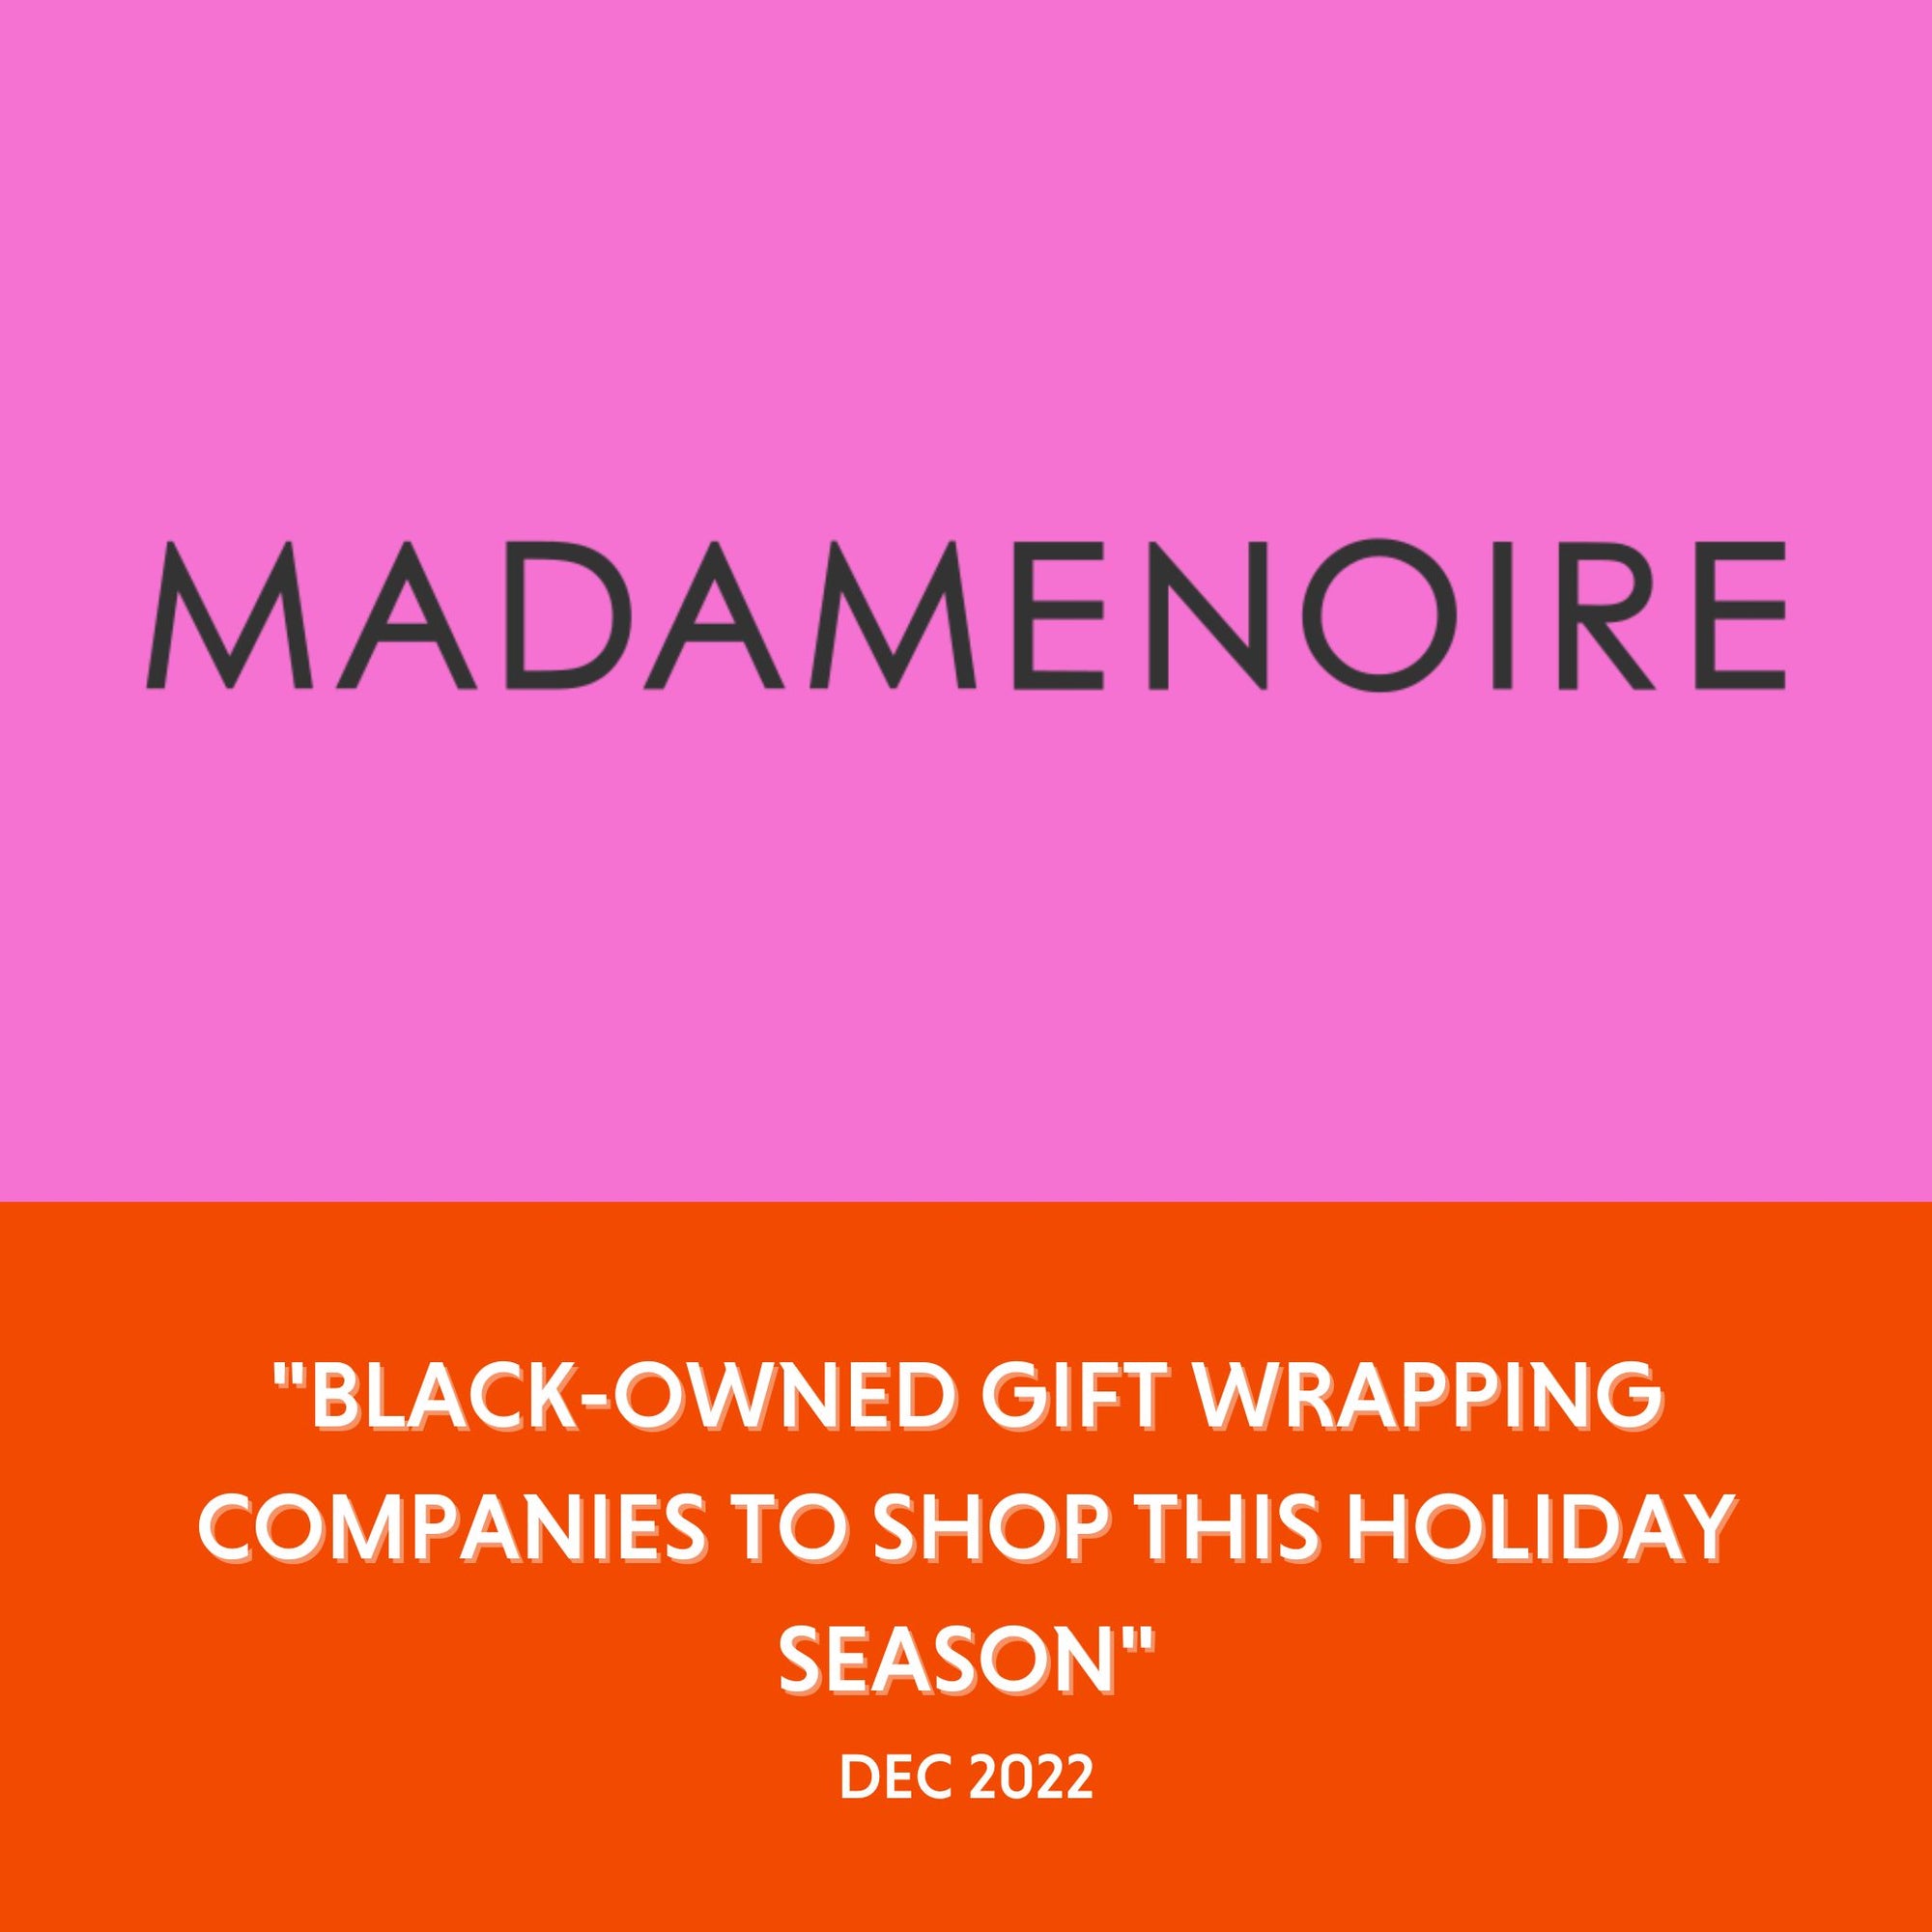 MadamNoire -"Black-Owned Gift Wrapping Companies To Shop This Holiday Season"- Dec 2022